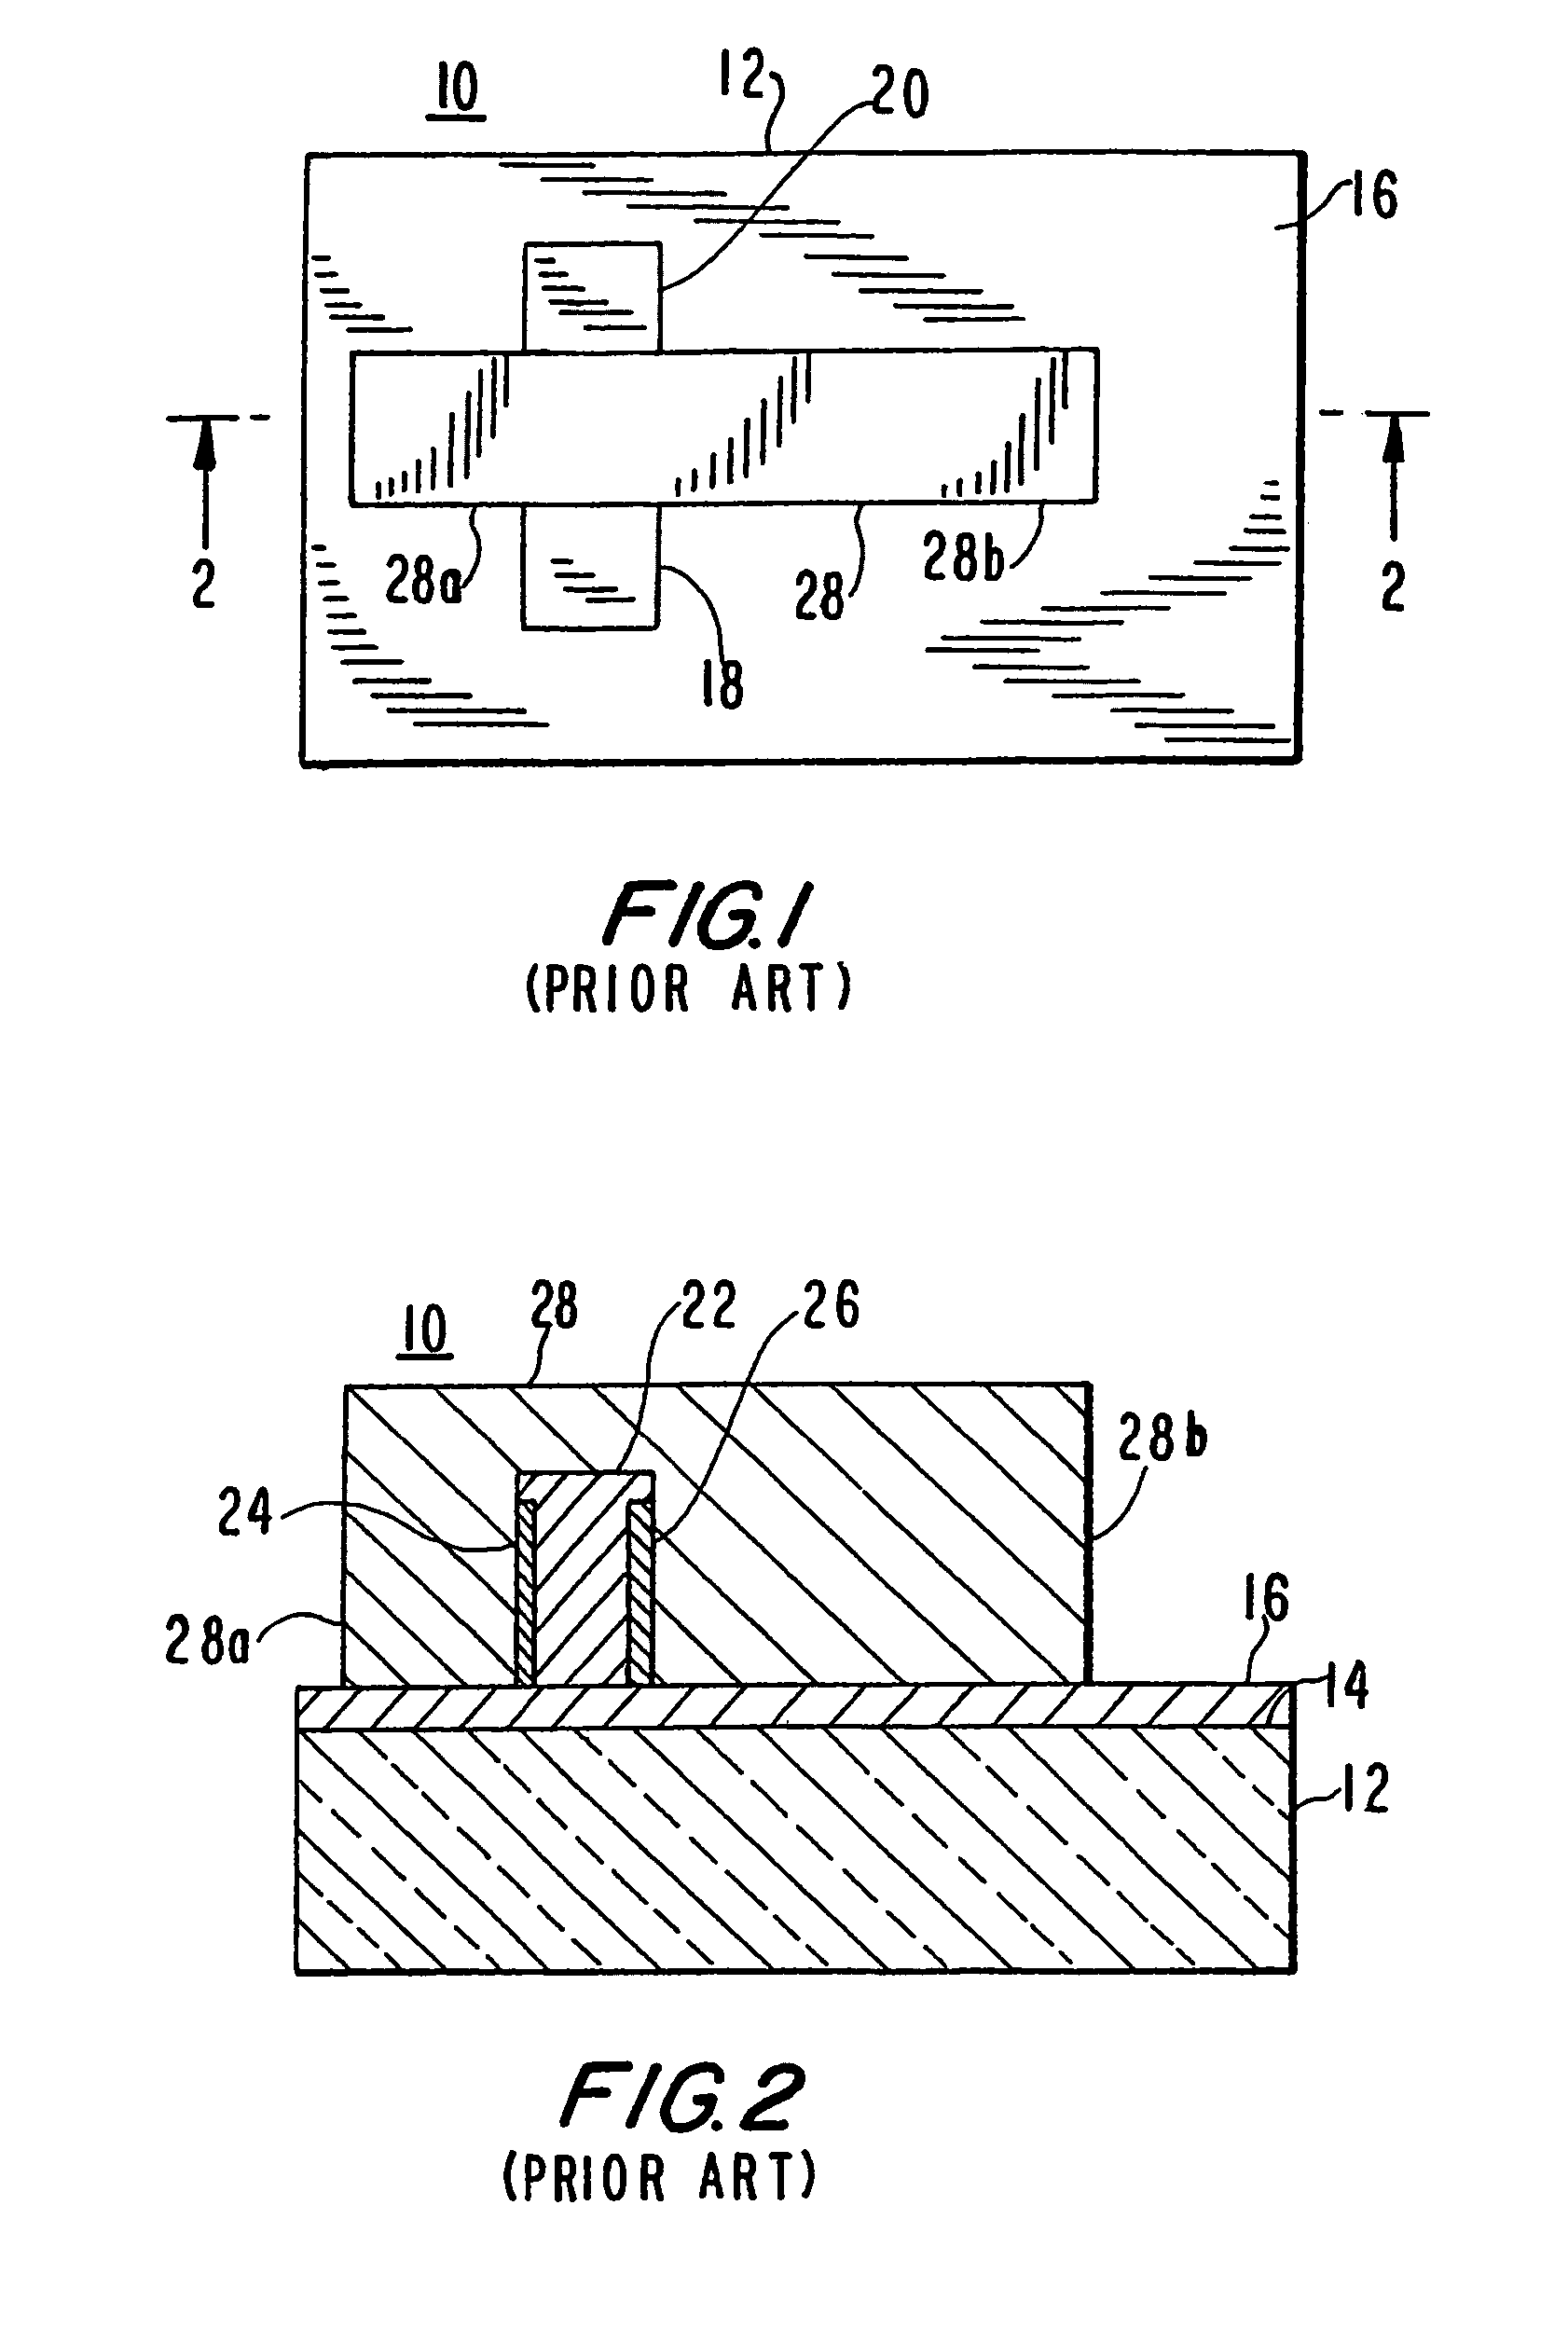 Semiconductor memory device with increased node capacitance